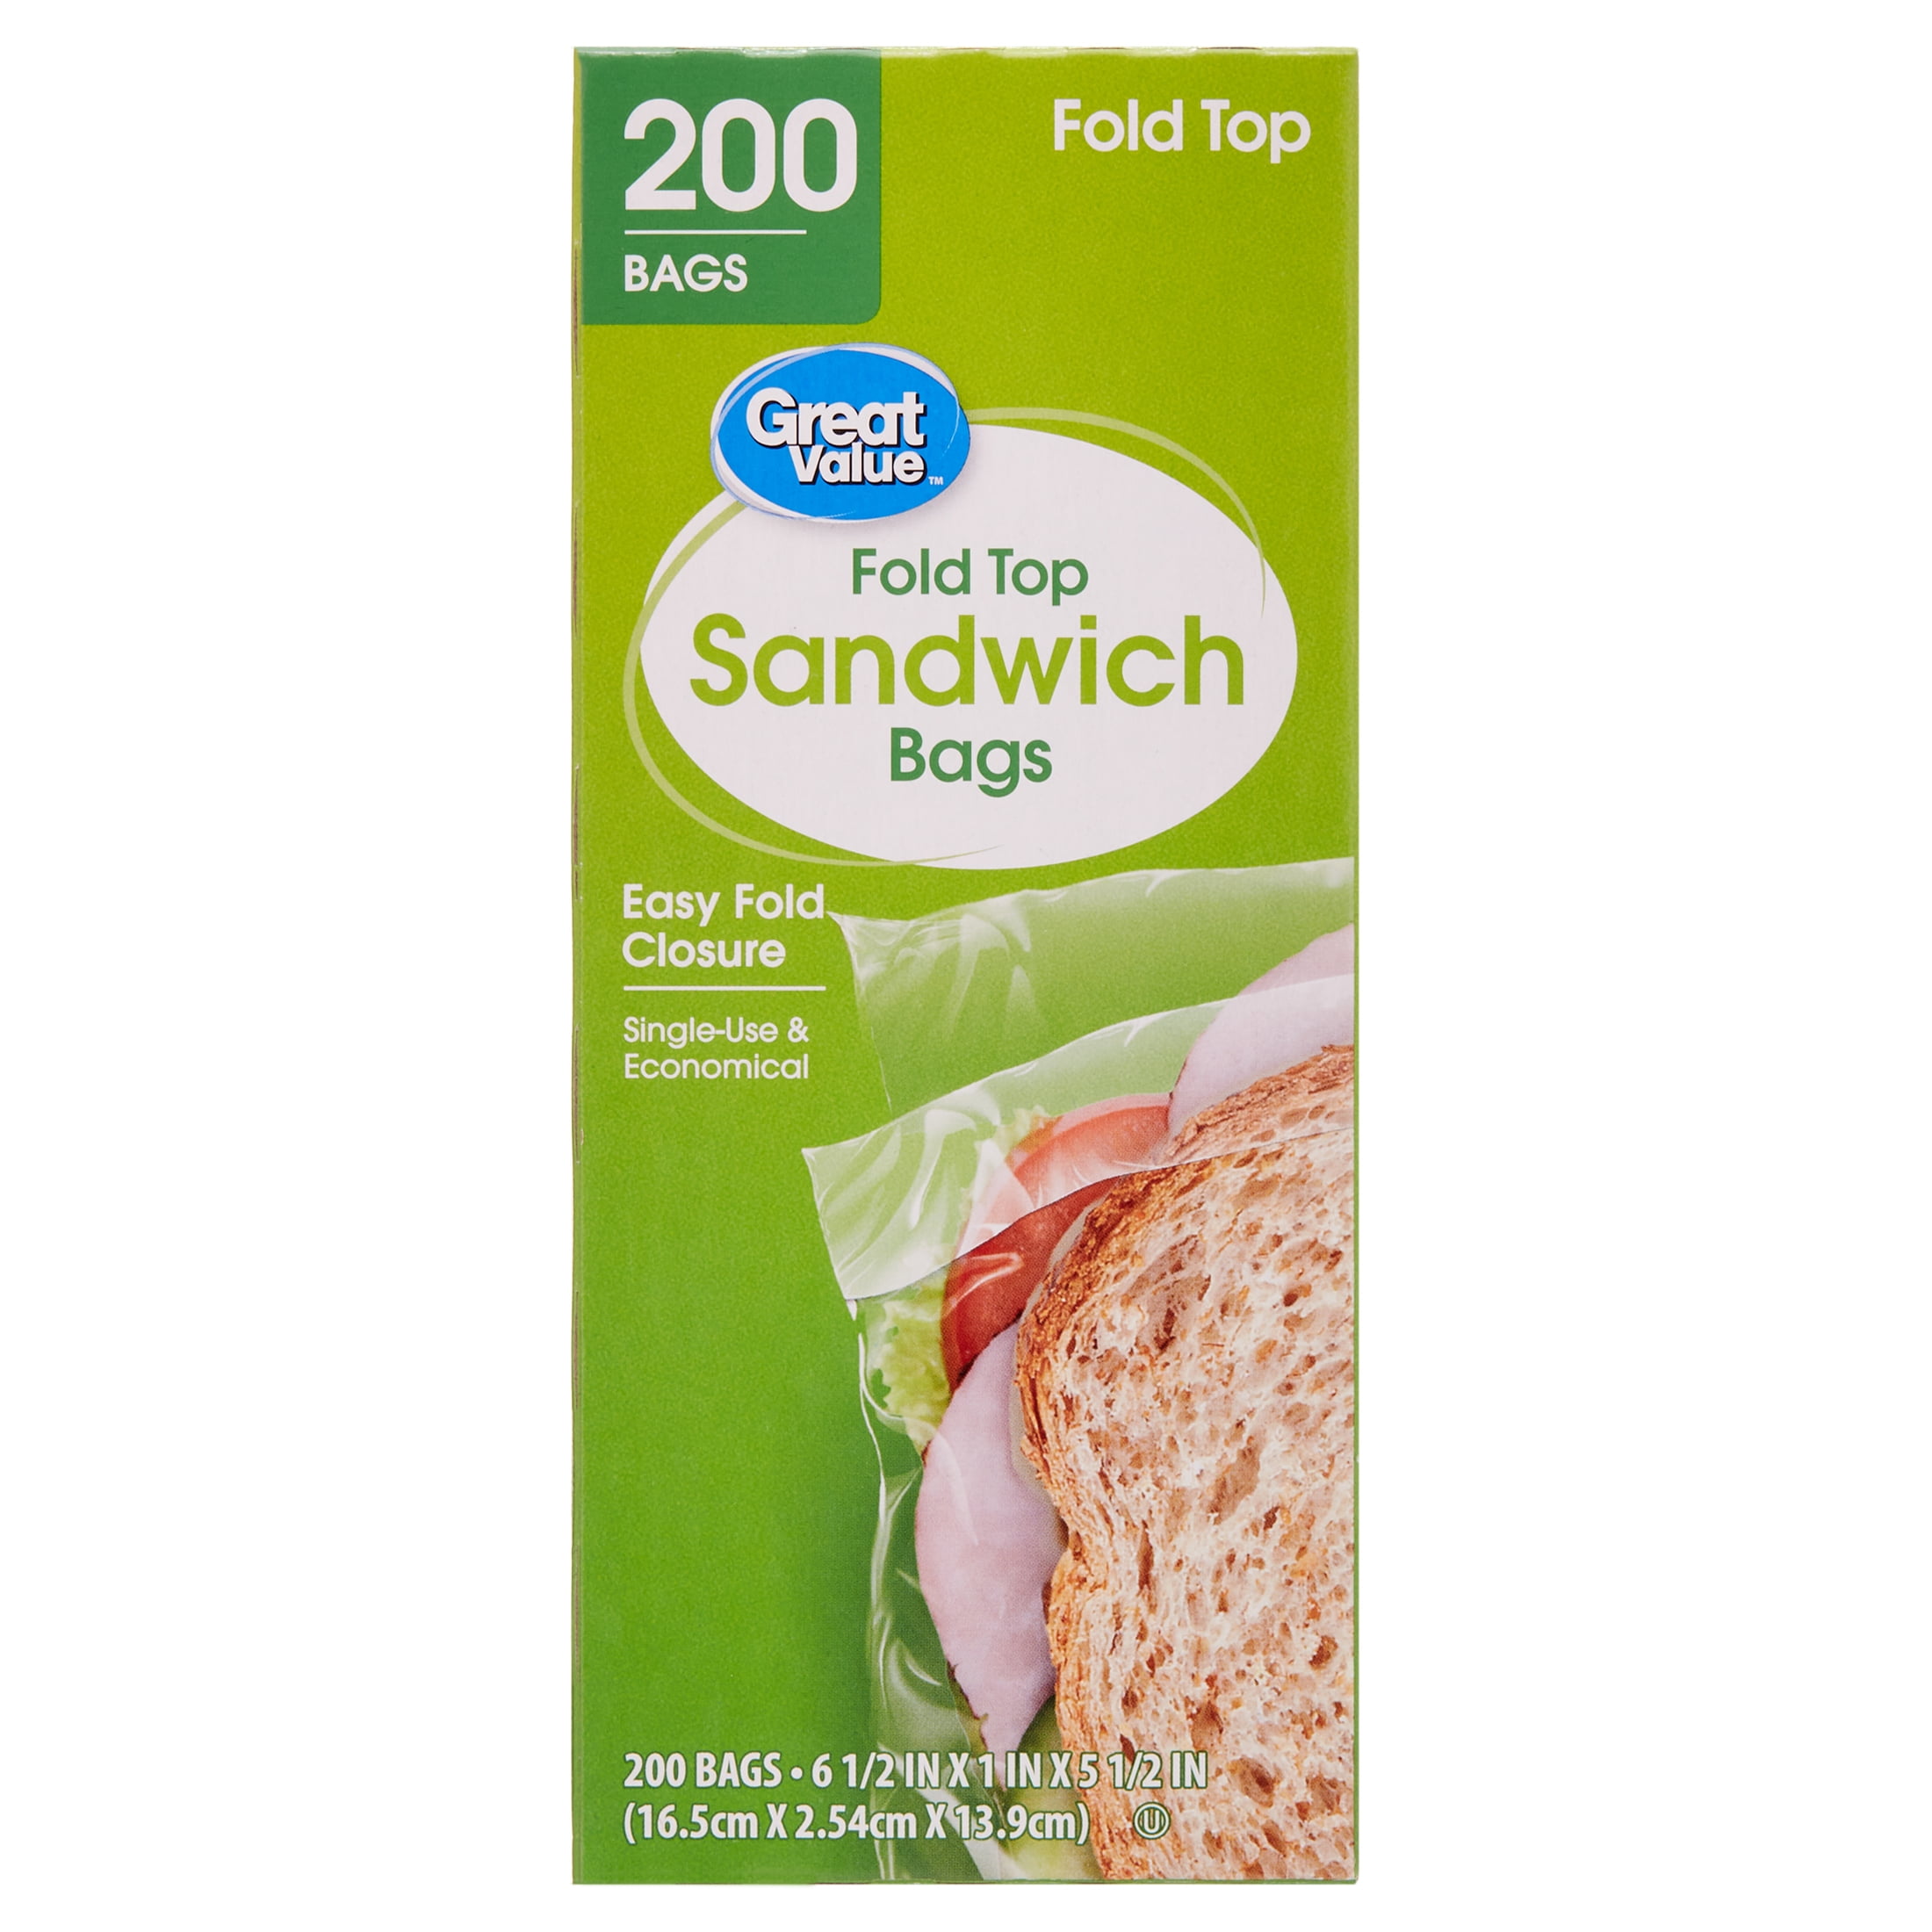 Great Value Fold Top Sandwich Bags, 200 Count